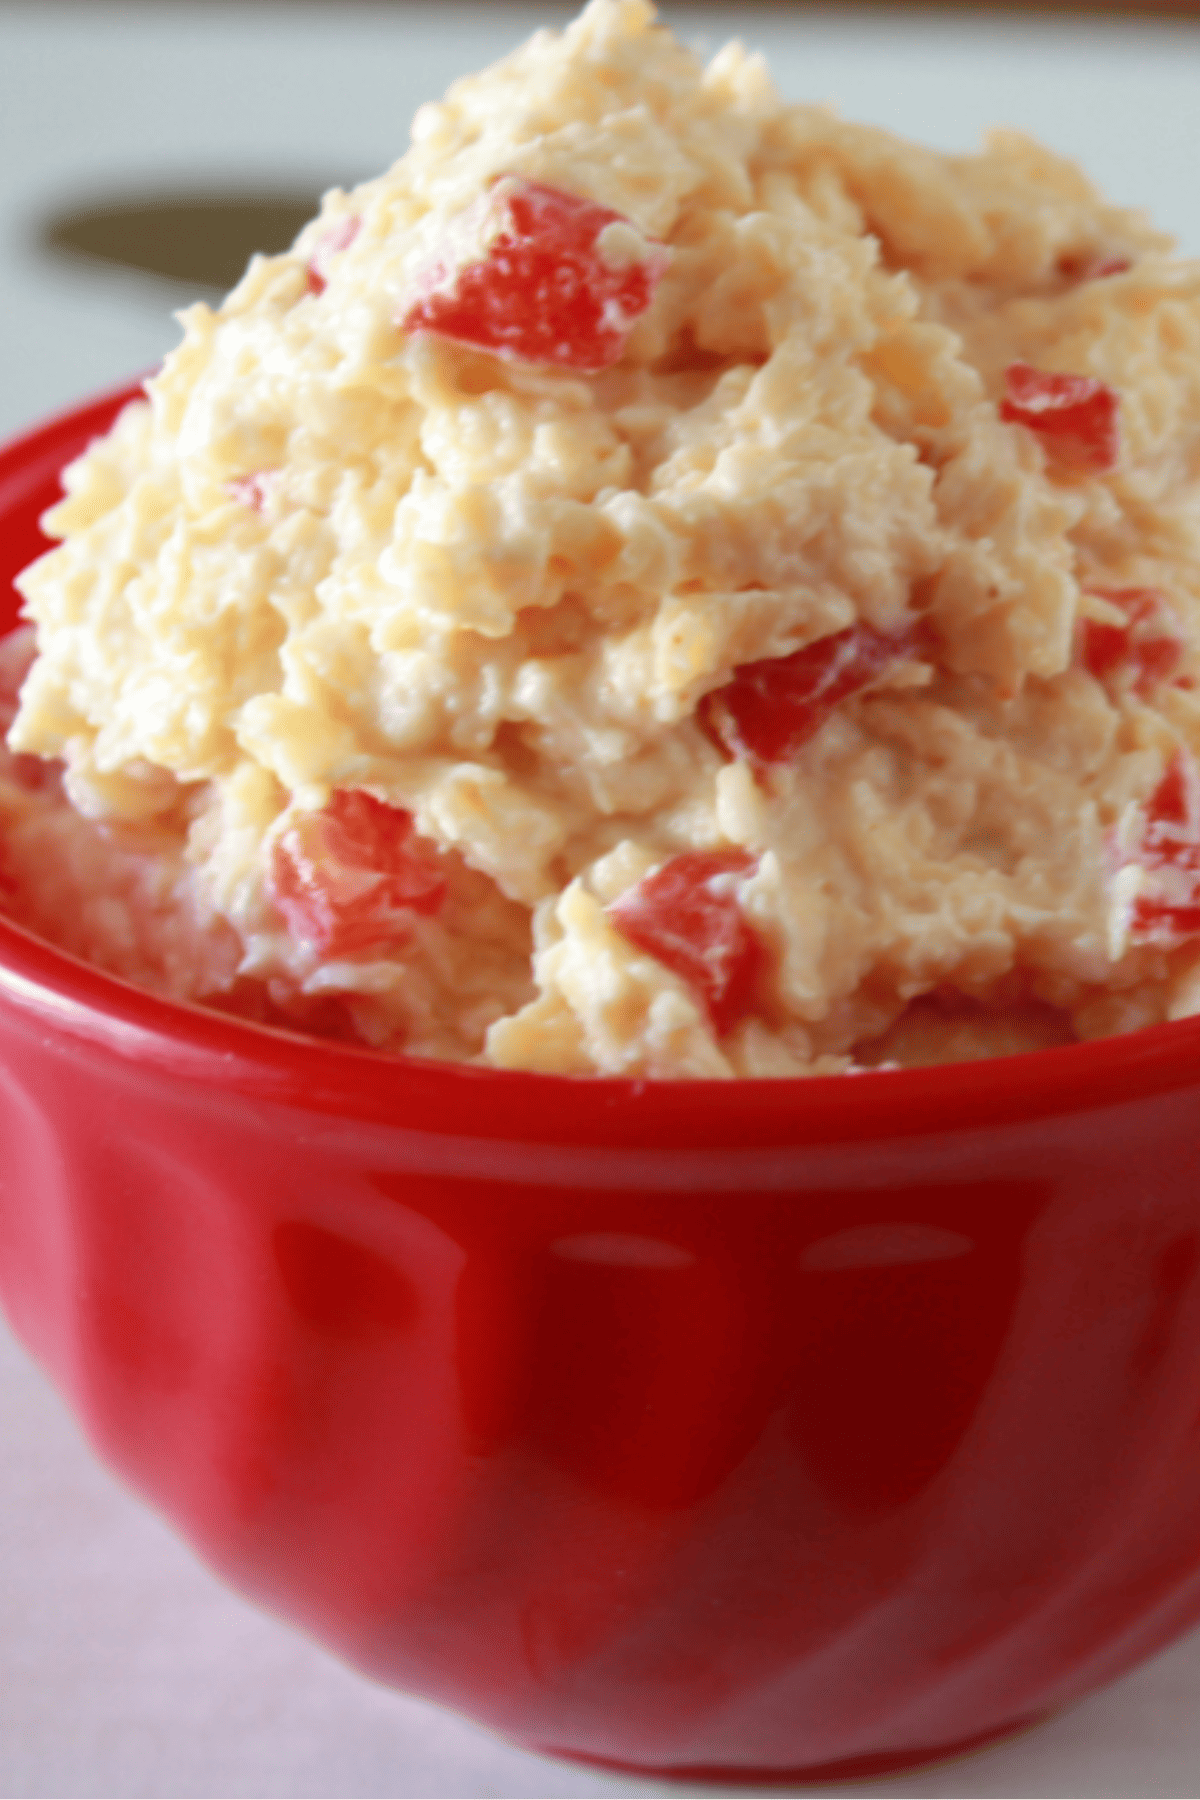 Bowl overflowing with pimento cheese.